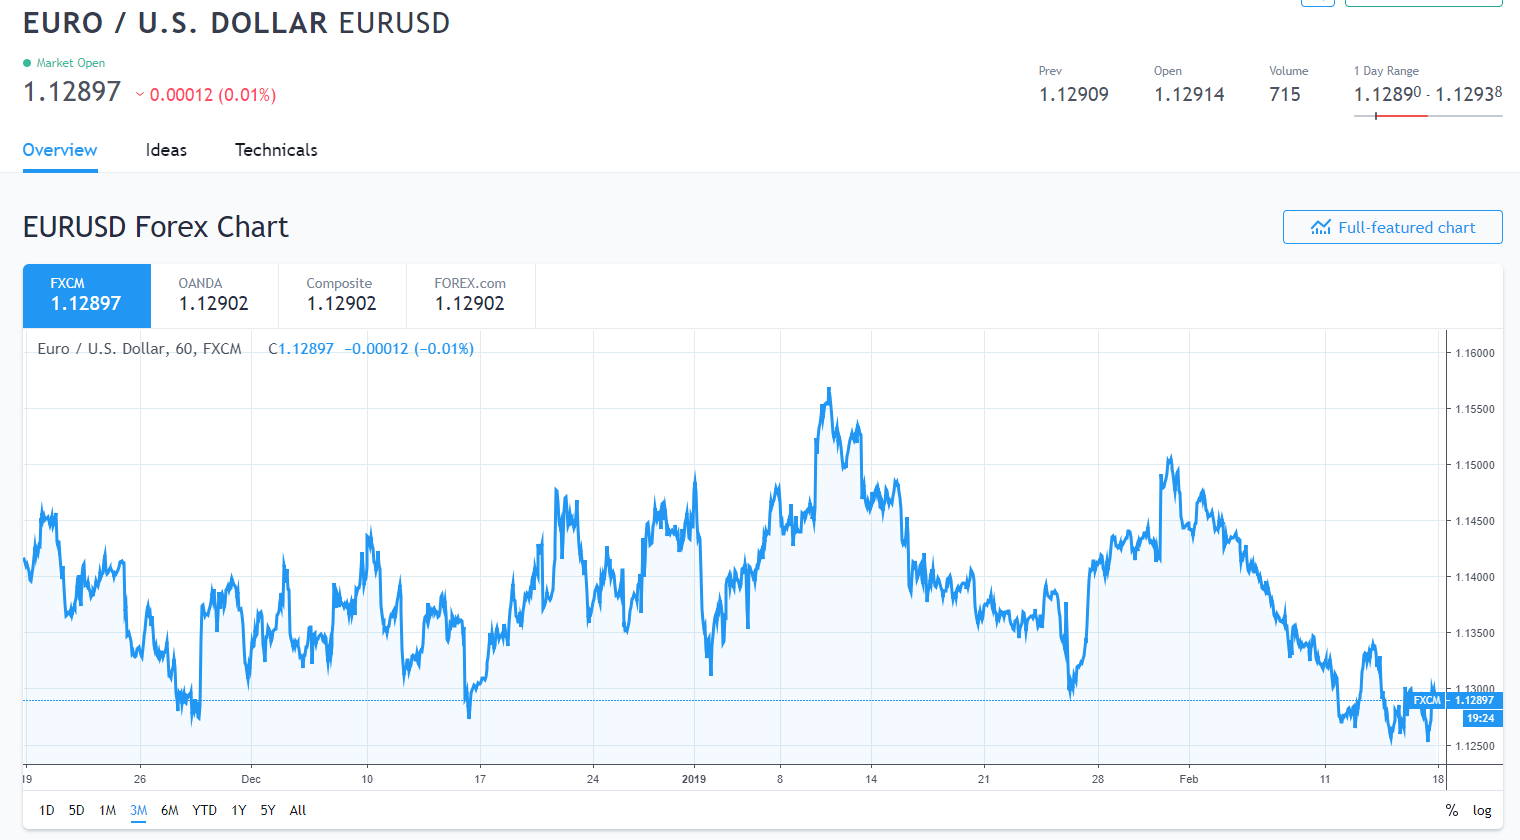 Trading View - 3M EUR USD Chart - 18 February 2019